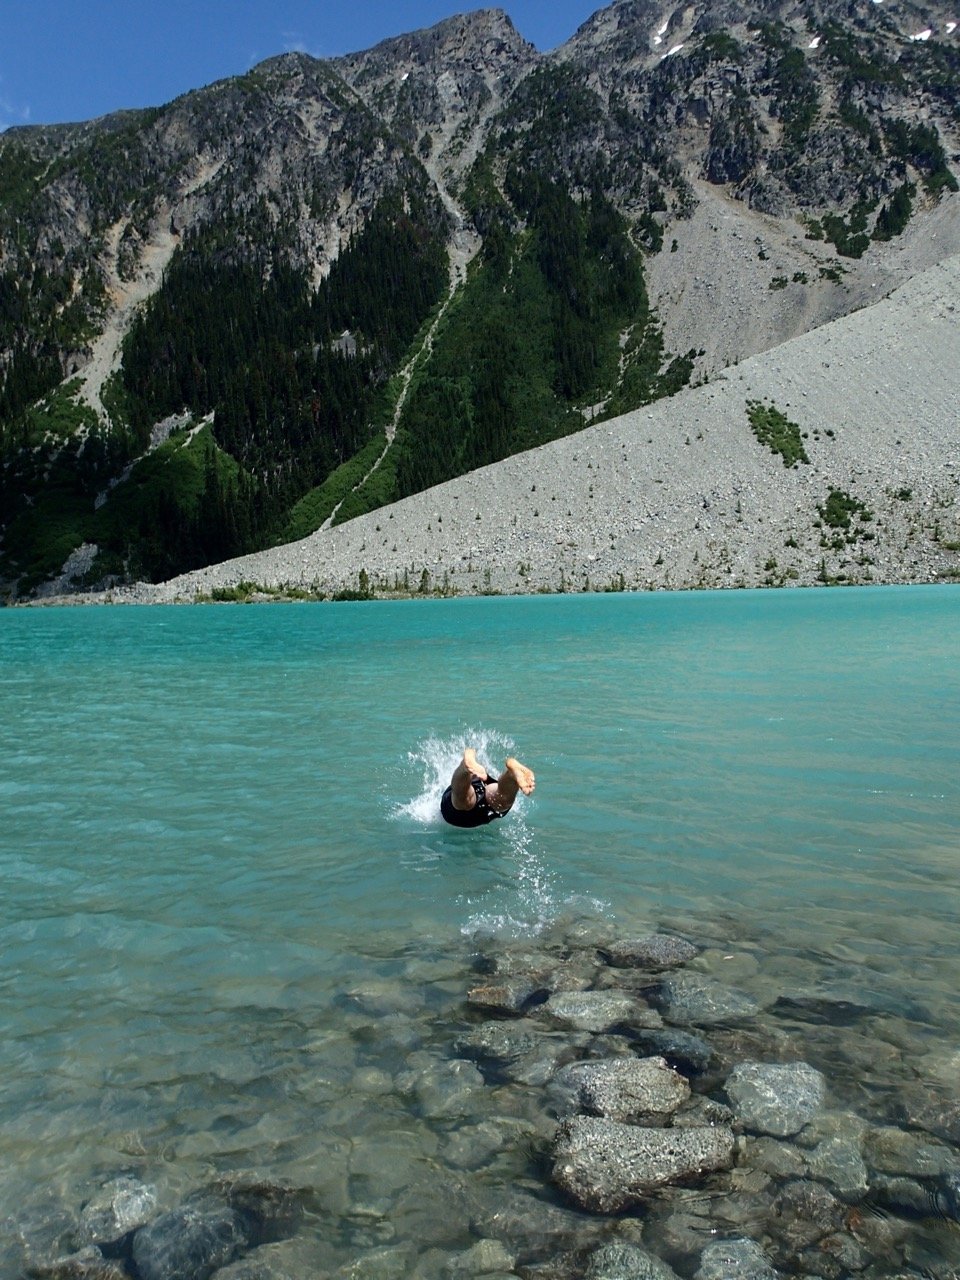 A hiker dives into a turquoise mountain lake